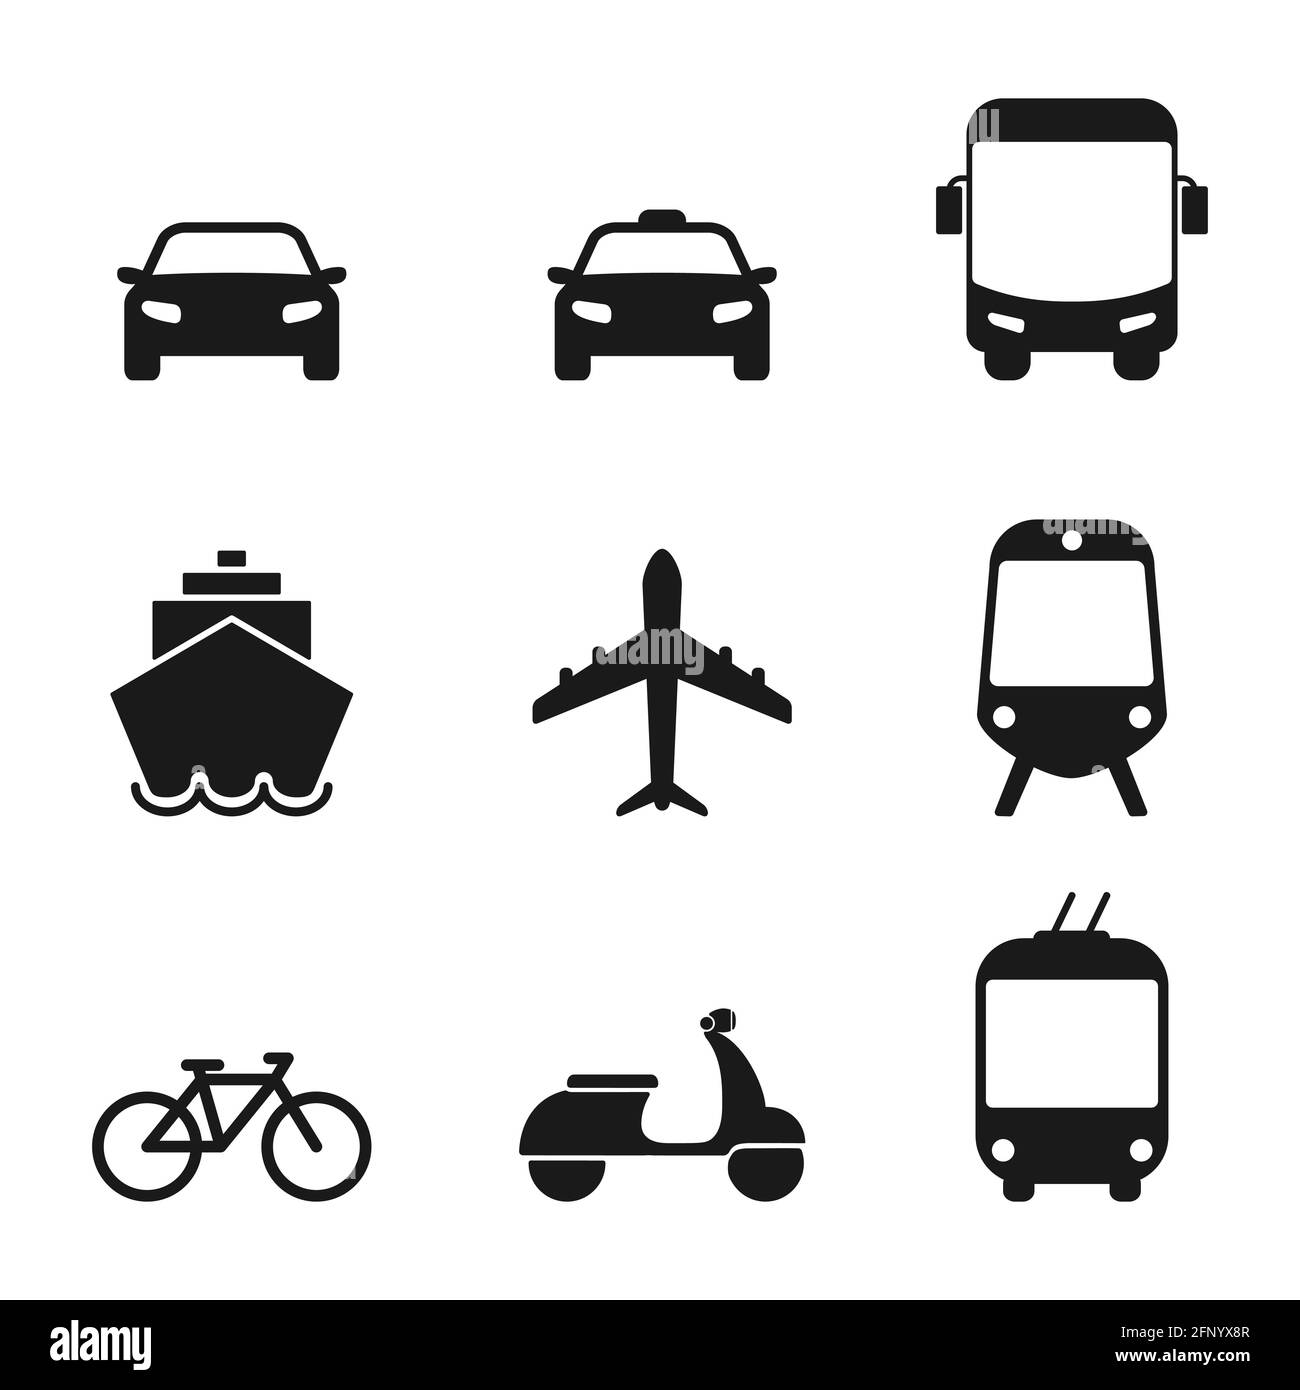 Transportation icon set. Taxi car, airplane, public bus, bike, scooter, trolleybus, train, ship and auto signs Stock Vector